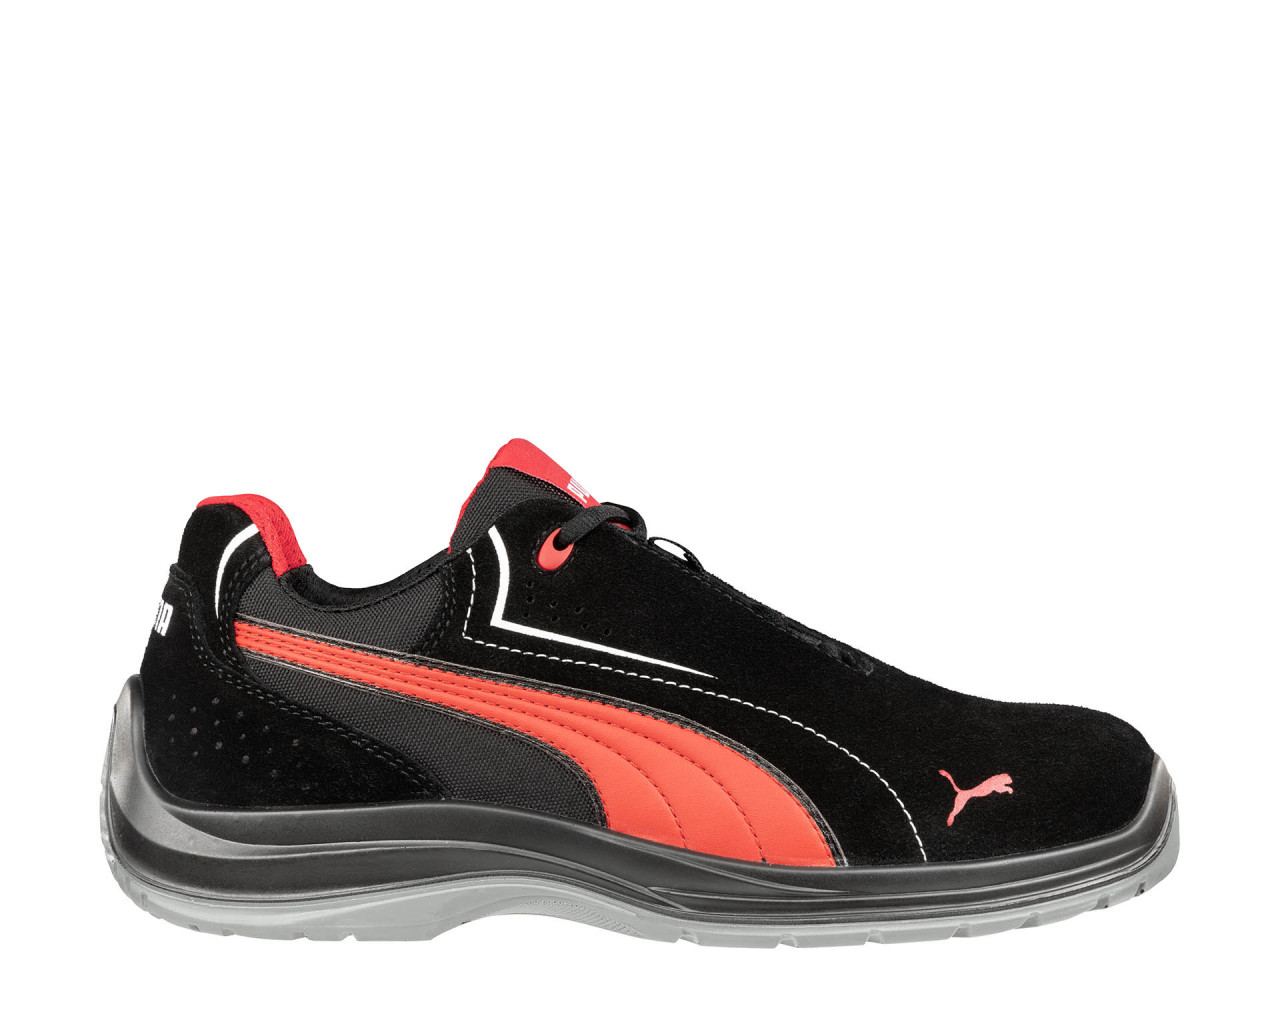 PUMA SAFETY TOURING BLACK SUEDE LOW S3 ESD SRC